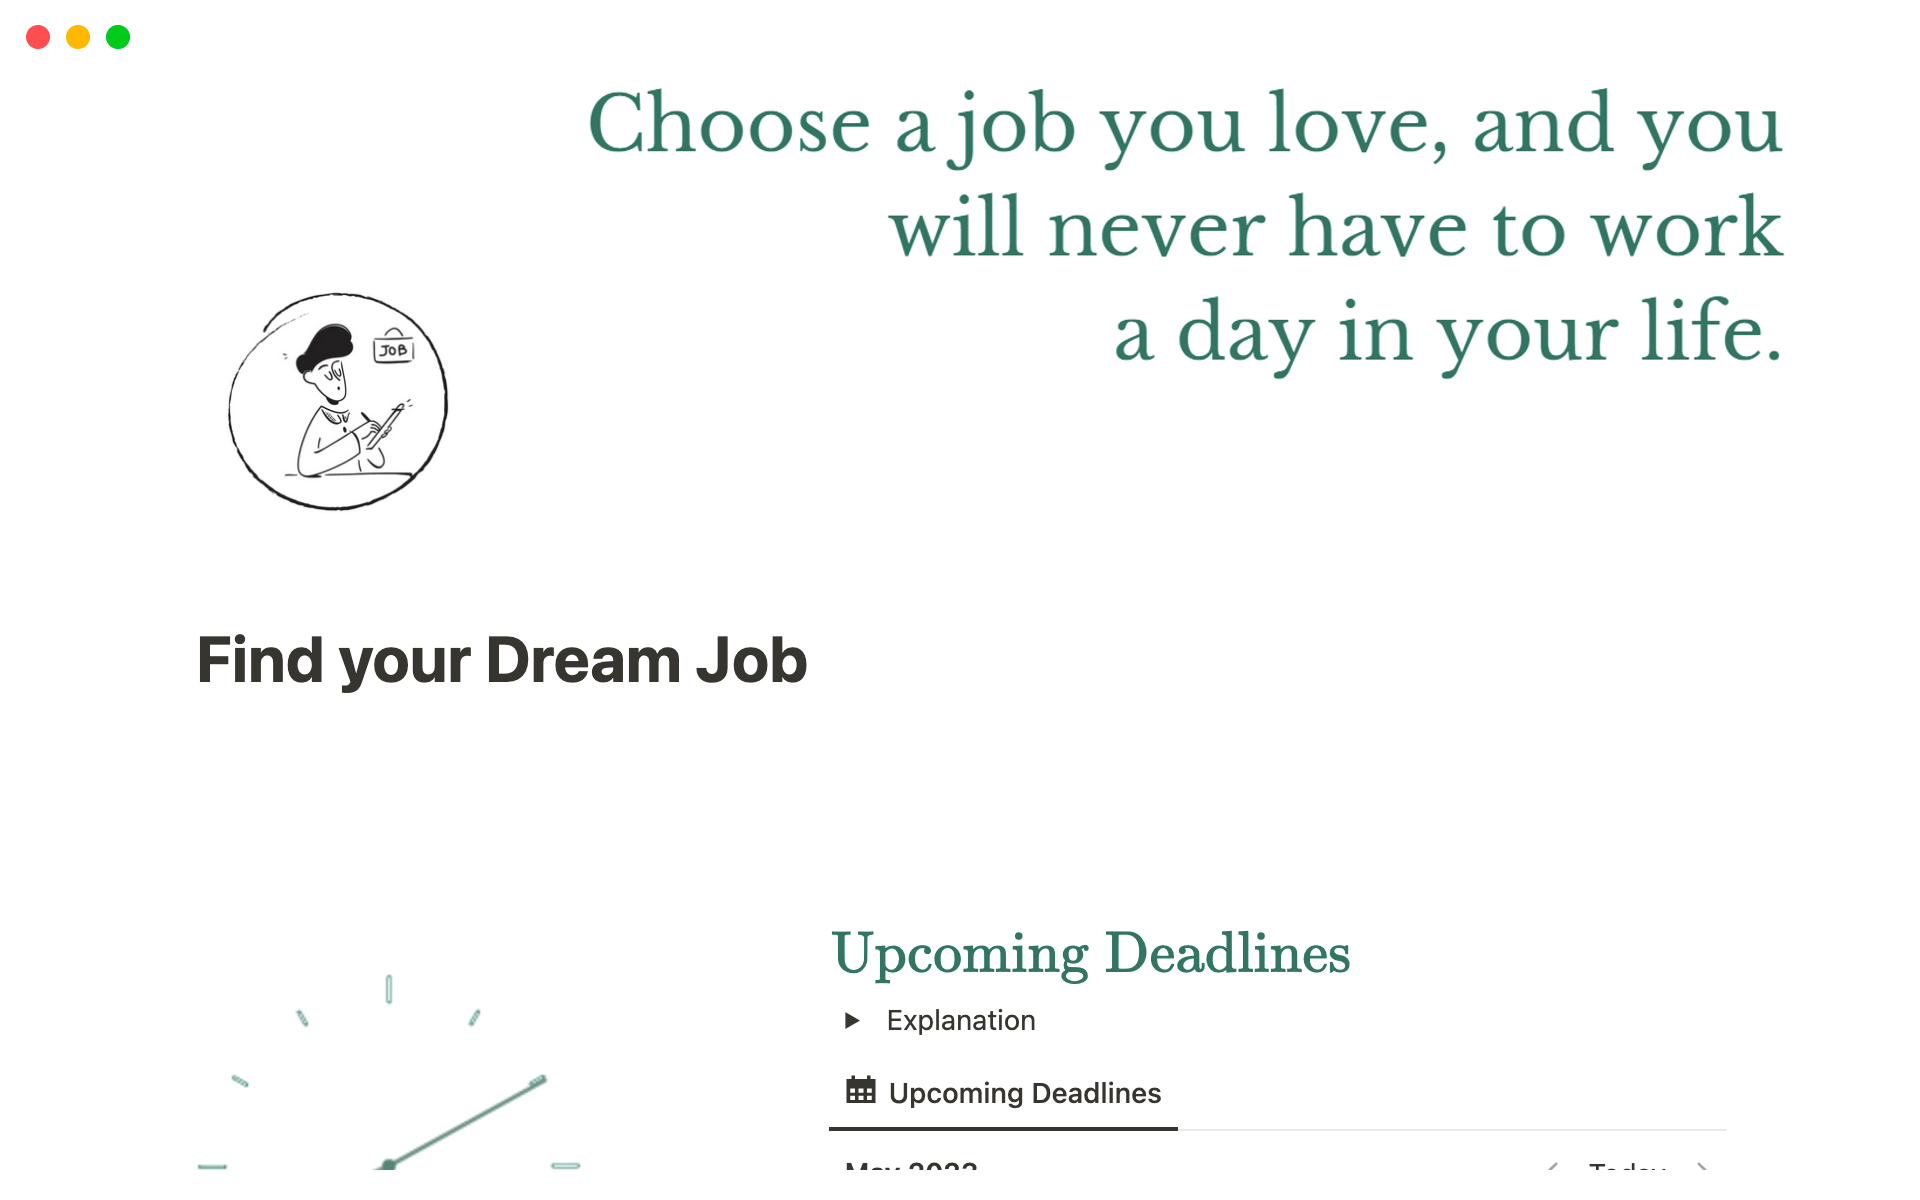 This template helps people to find their dream job.